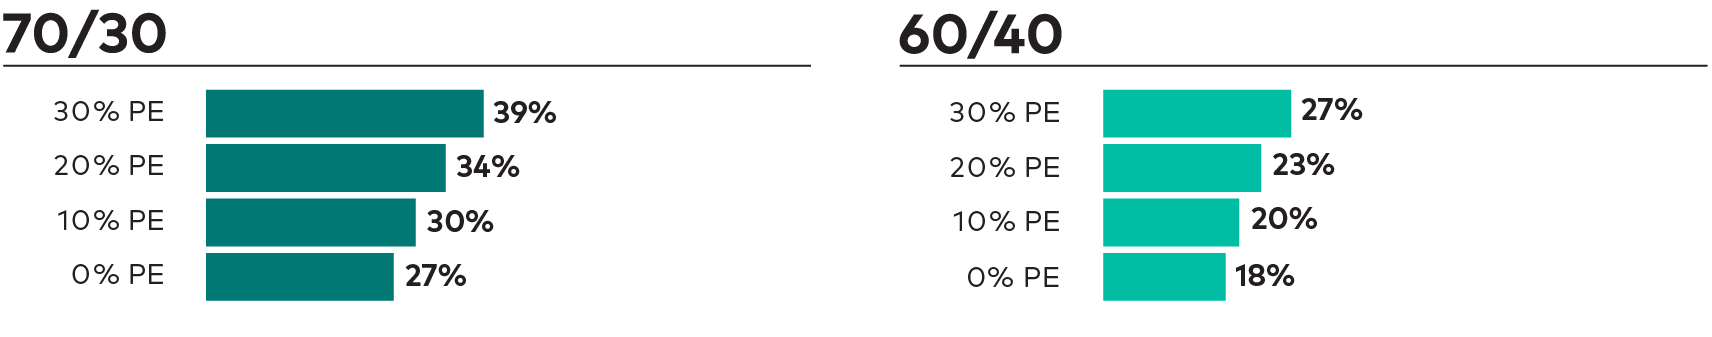 The image shows the probability of meeting or exceeding annualized returns of 6% over 10 years for eight hypothetical portfolios. Four of the hypothetical portfolios have 70% in equities and 30% in bonds; the other four have 60% in equities and 40% in bonds. The equity portion of each portfolio has either a 0%, 10%, 20%, or 30% allocation in private equity (PE). A 10% PE allocation means 7% of an overall 70/30 portfolio or 6% of an overall 60/40 portfolio is invested in PE. In our analysis, the probability of meeting or exceeding the 6% annualized return target over 10 years ranges from 18% for a 60/40 portfolio with 0% PE to 39% for a 70/30 portfolio with 30% PE.